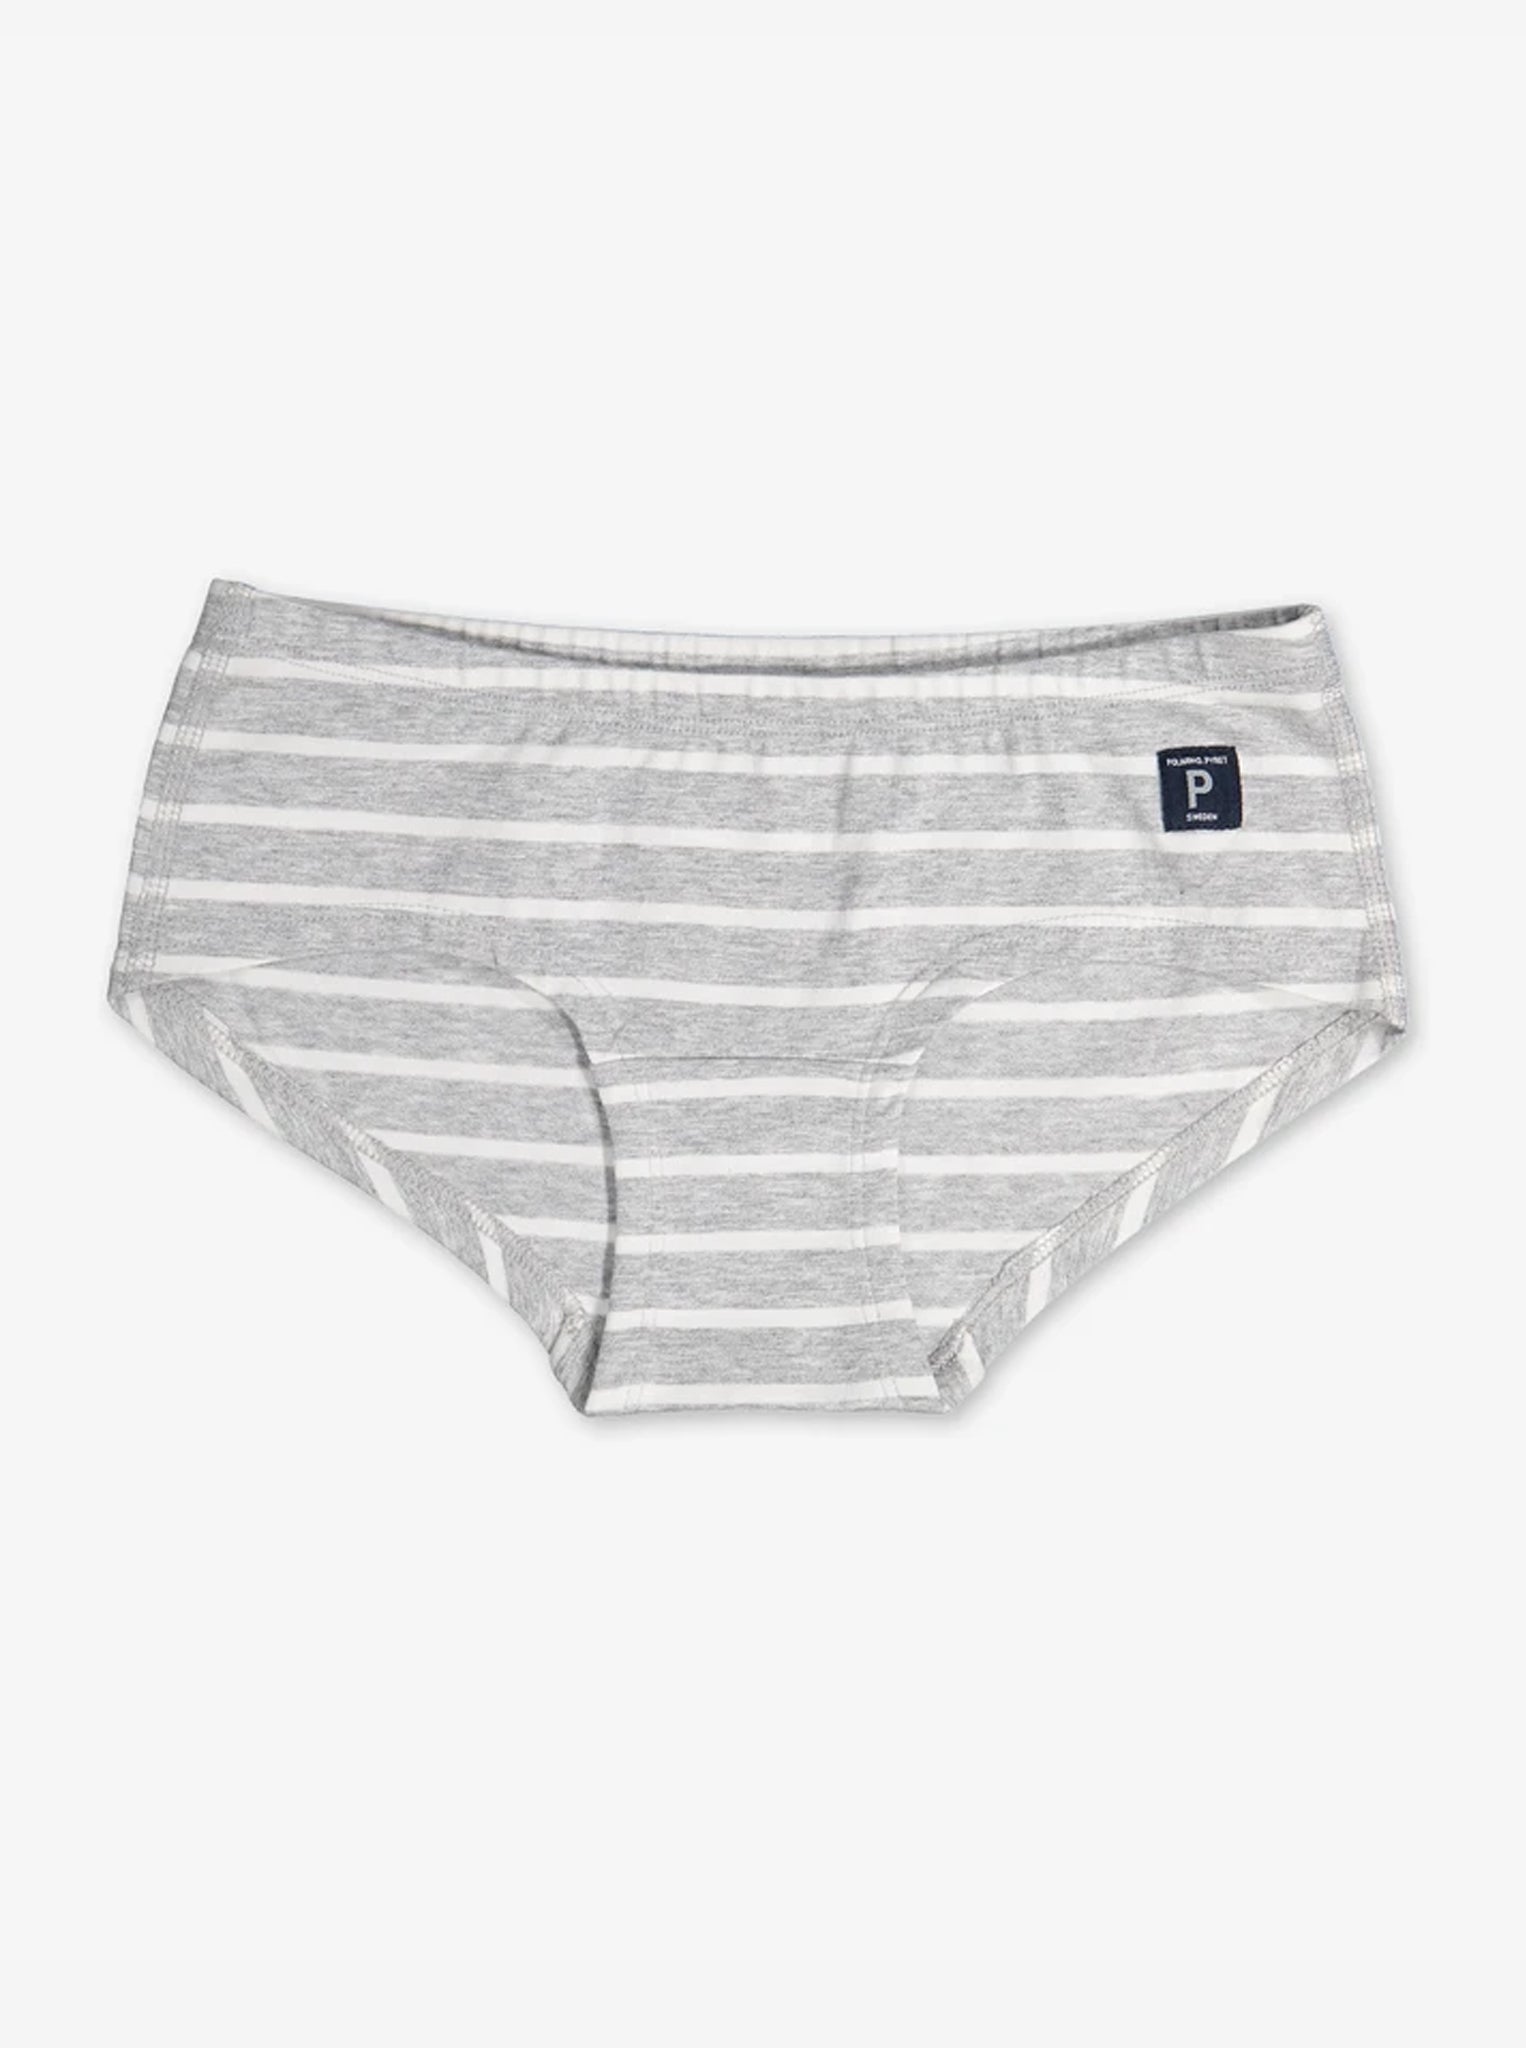 girls grey and white striped hipster pants briefs, comfortable quality organic cotton, polarn o. pyret